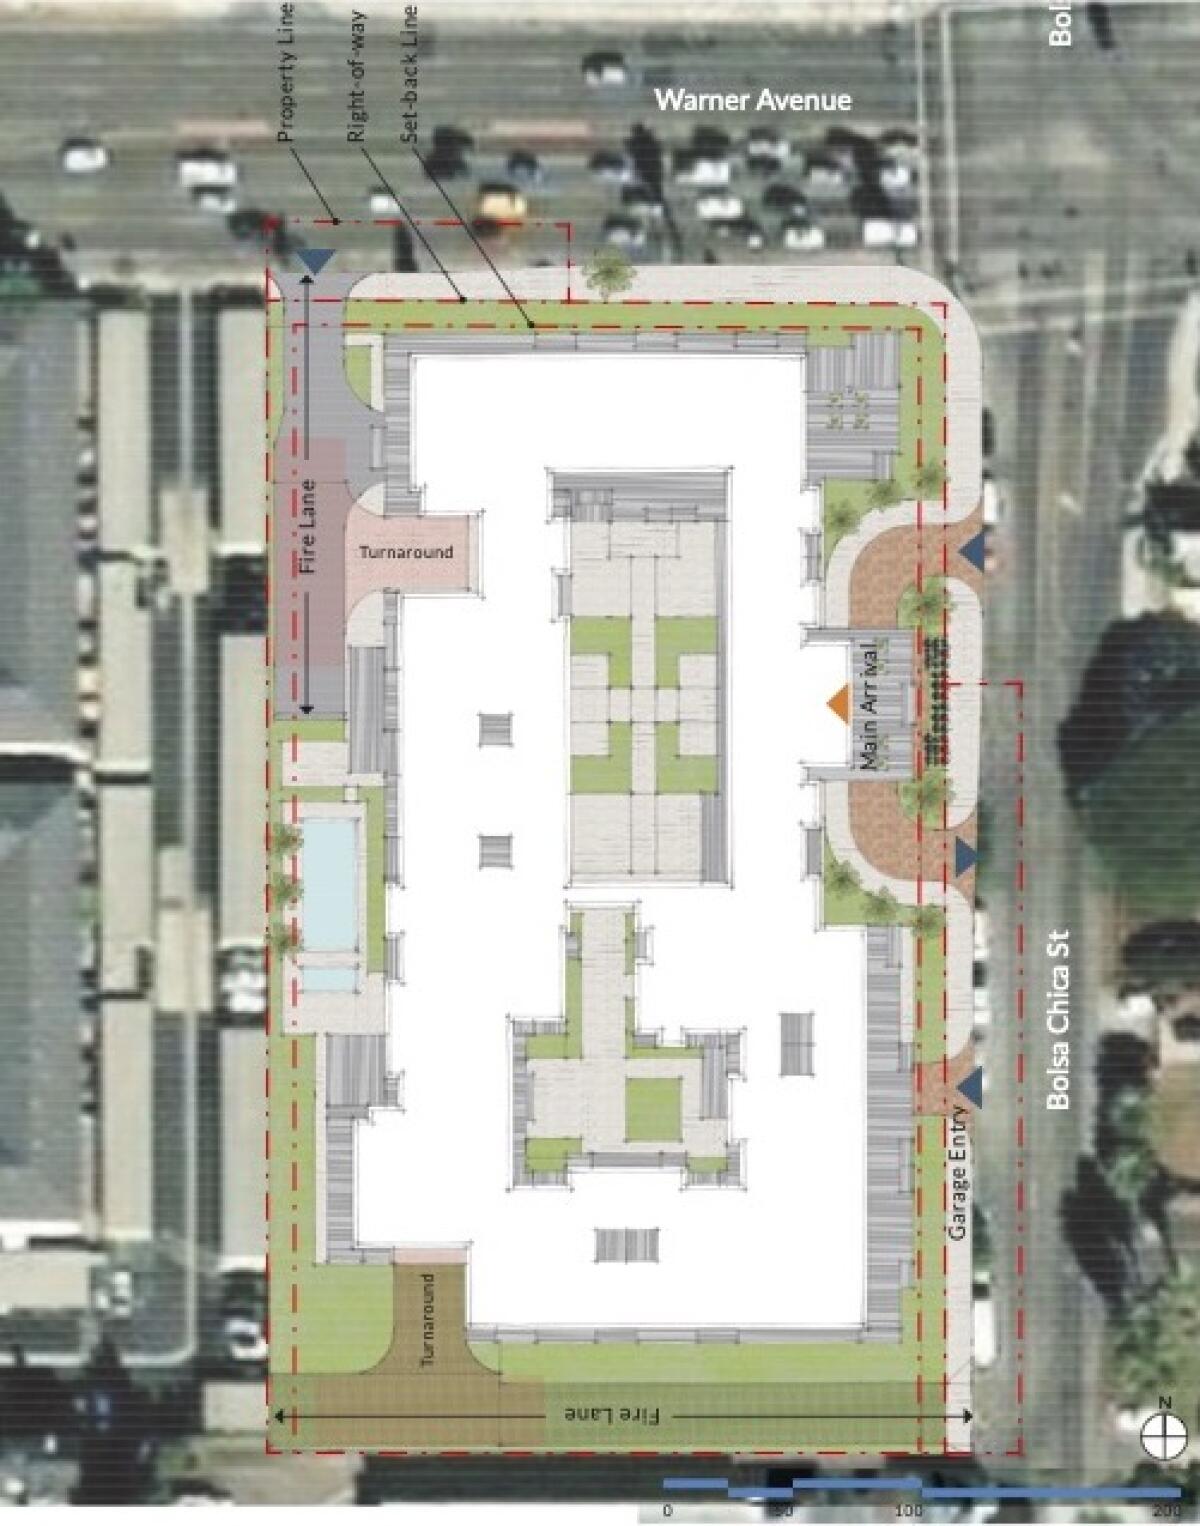 The proposed site plan for the Bolsa Chica Senior Living project.